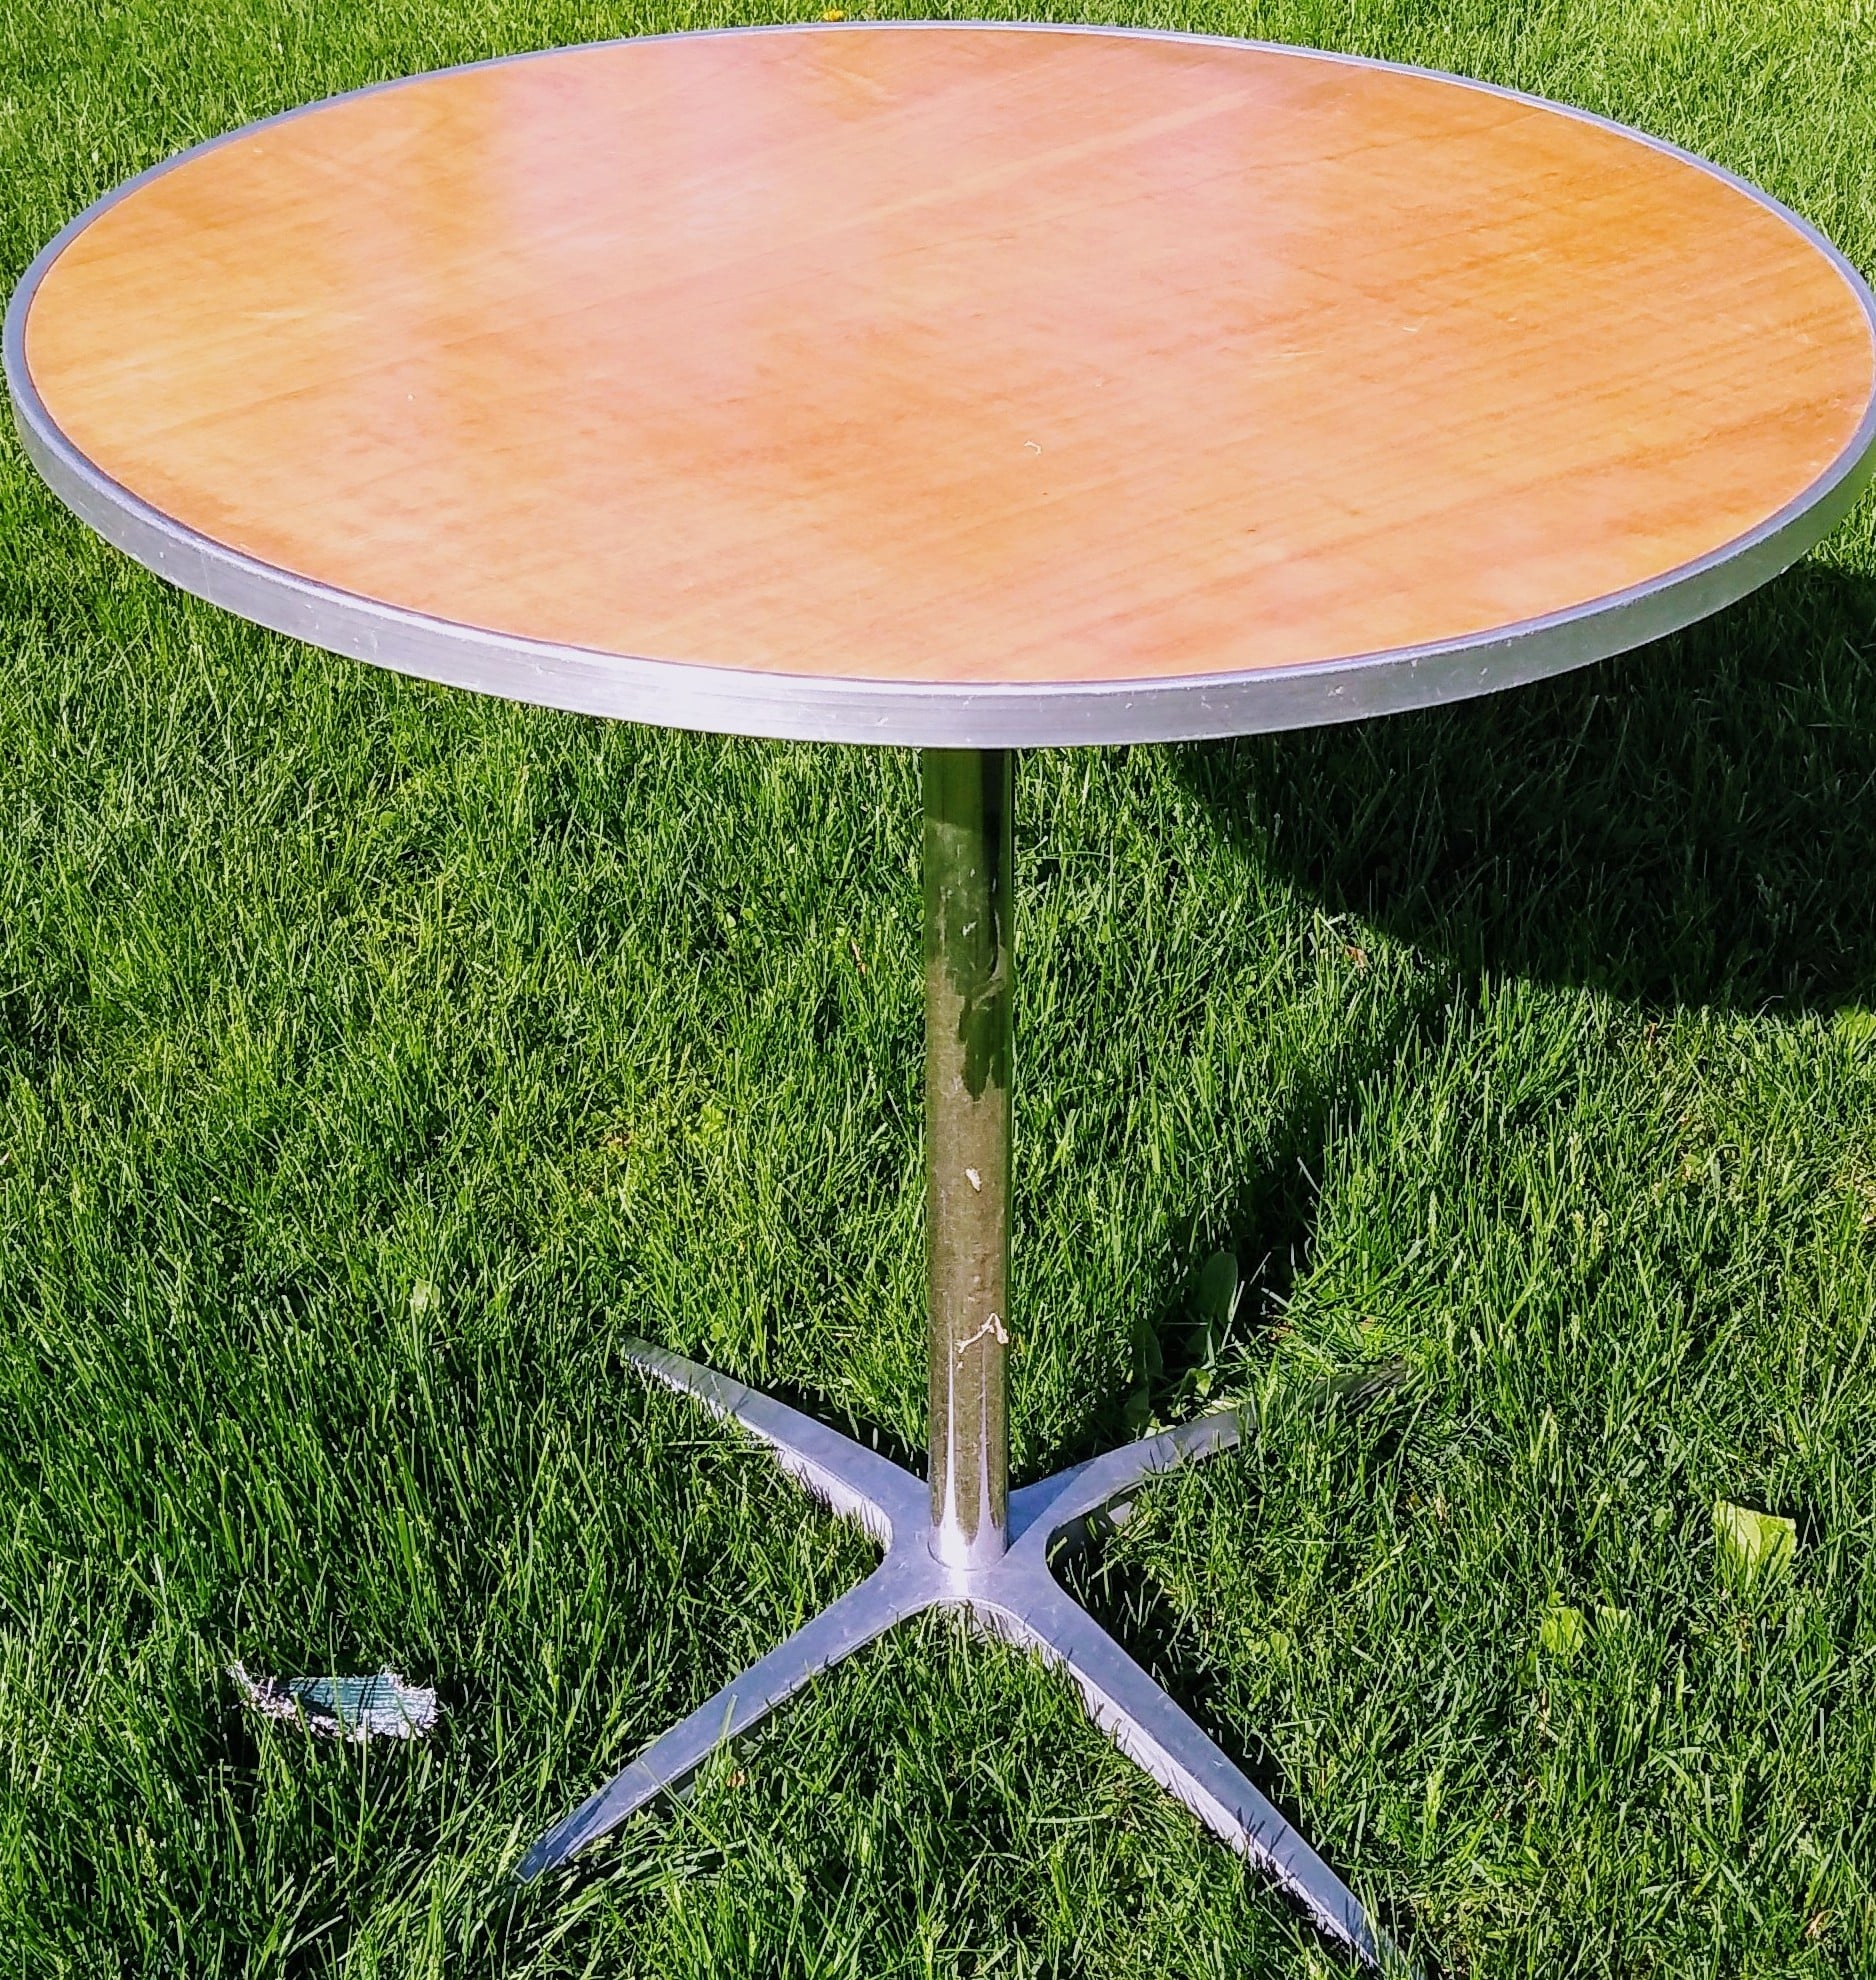 30" Round Table - A to Z Event Rentals, LLC.